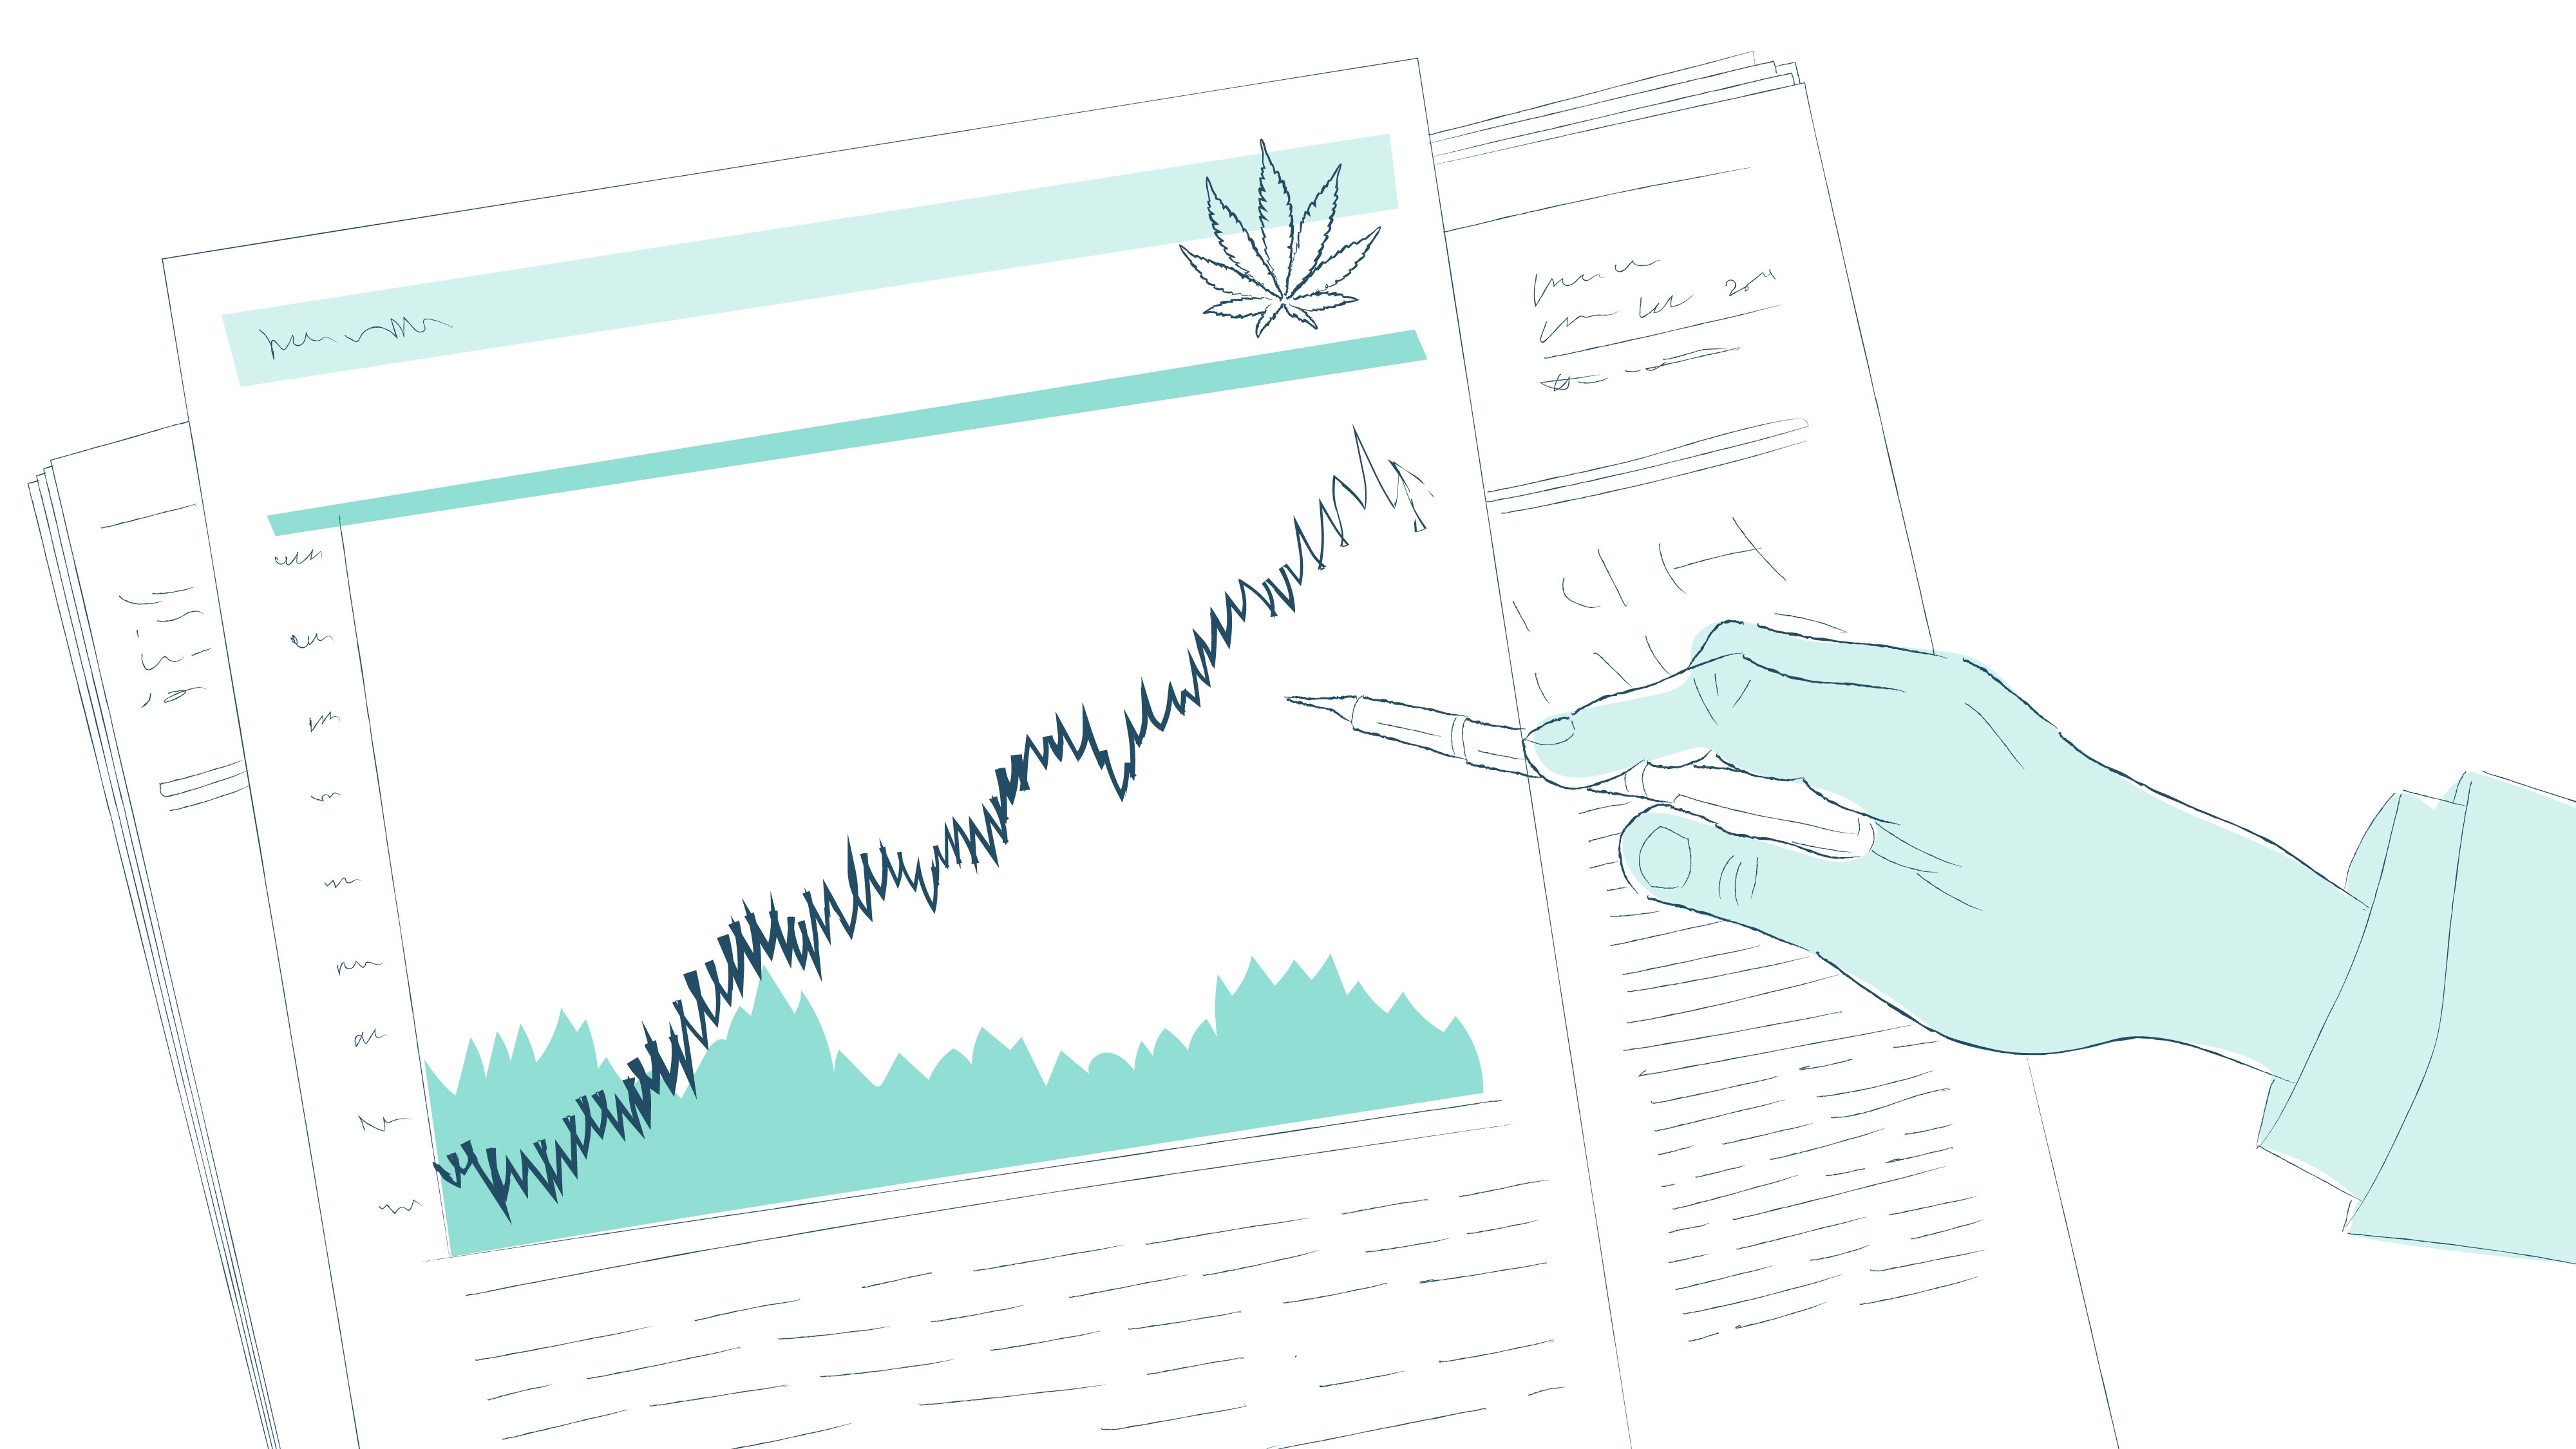 Cannabis Co. Green Thumb Industries Posts Strong Q1, With Revenue Up 89.5% YoY